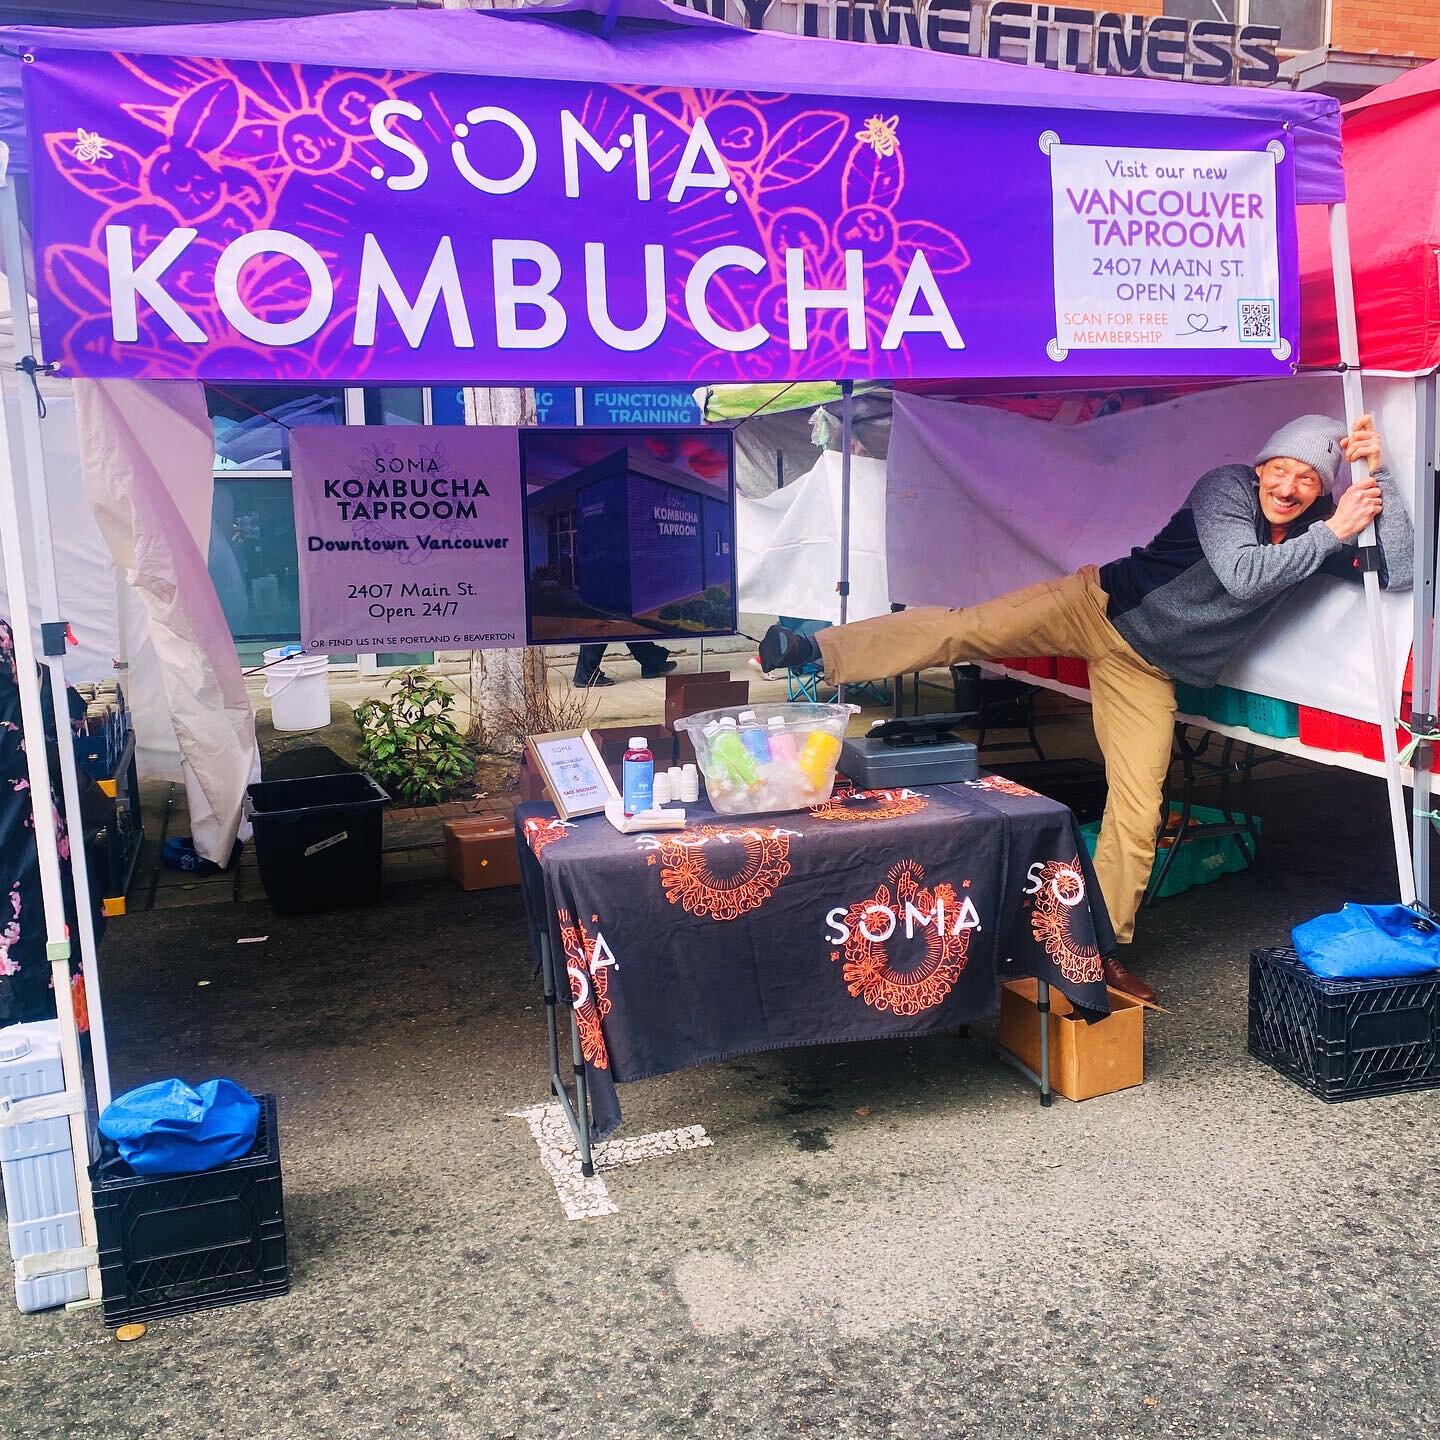 Holdin&rsquo; it down at the Vancouver Farmer&rsquo;s Market.  Stop by and see us!  The sun is coming out, we swear. @vancouverfarmersmarket #pnwcollective #rainorshine #farmersmarket